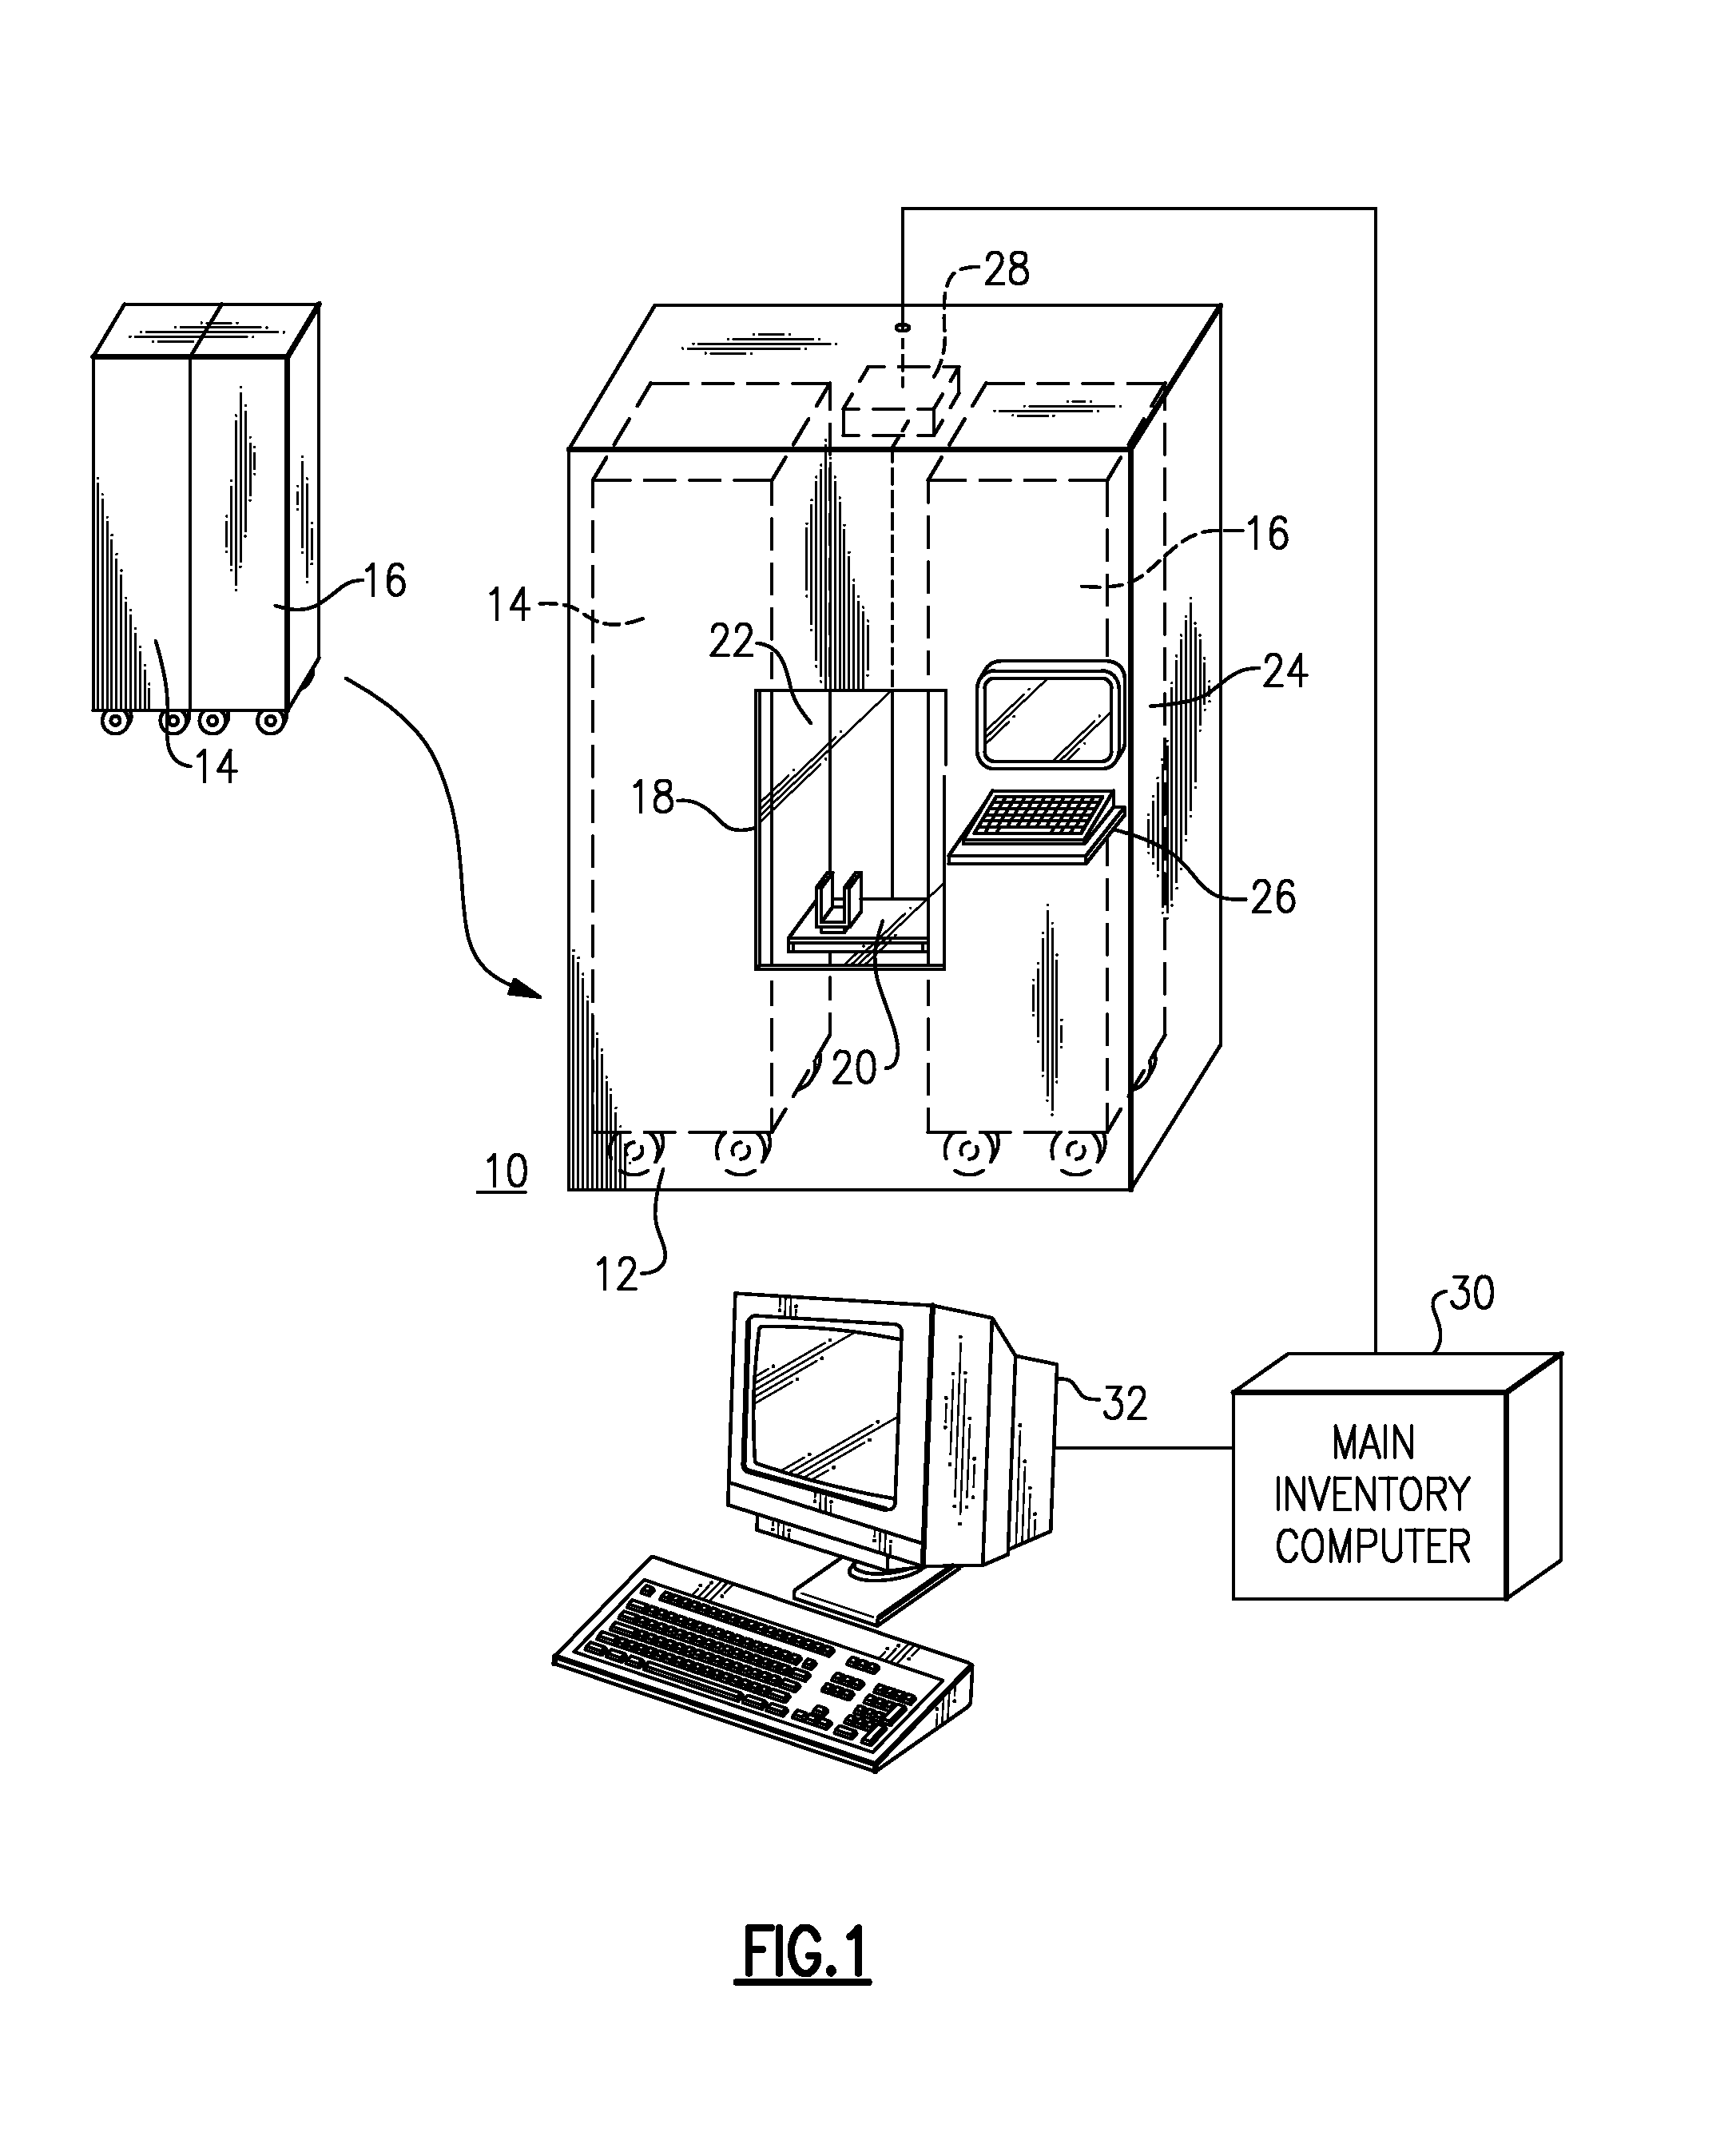 Controlled access supply cabinet and system